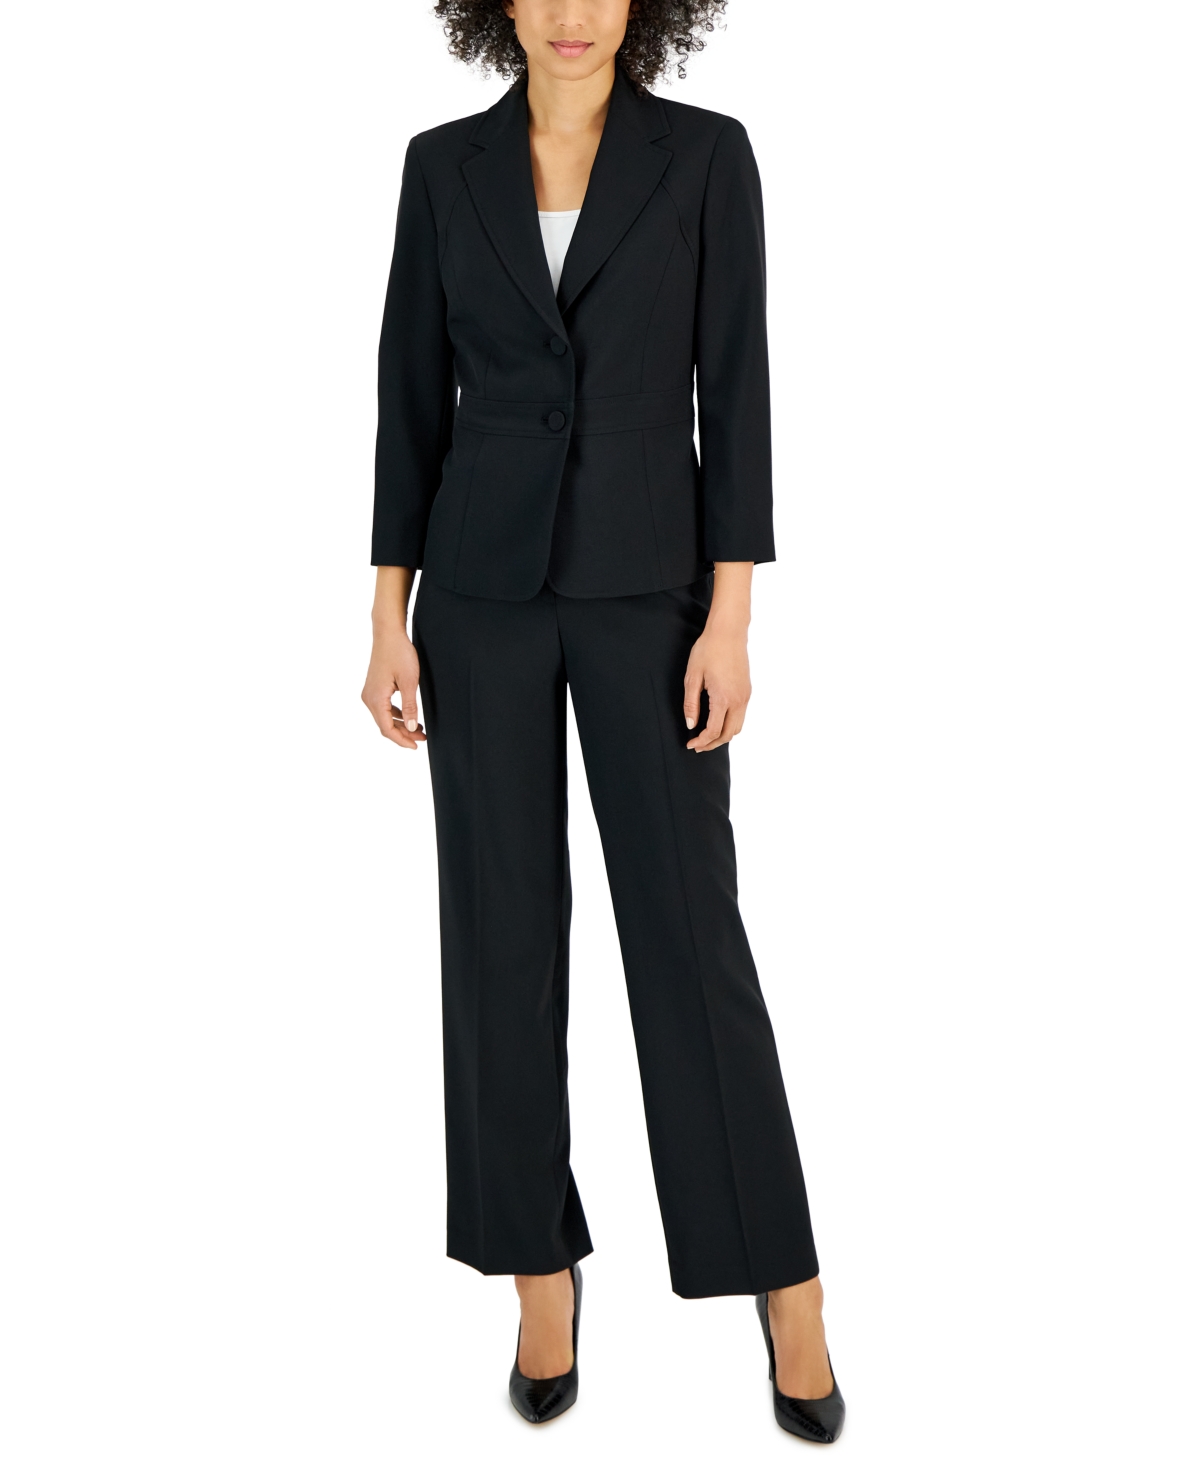 Crepe Two-Button Blazer & Pants, Regular and Petite Sizes - Wild Rose